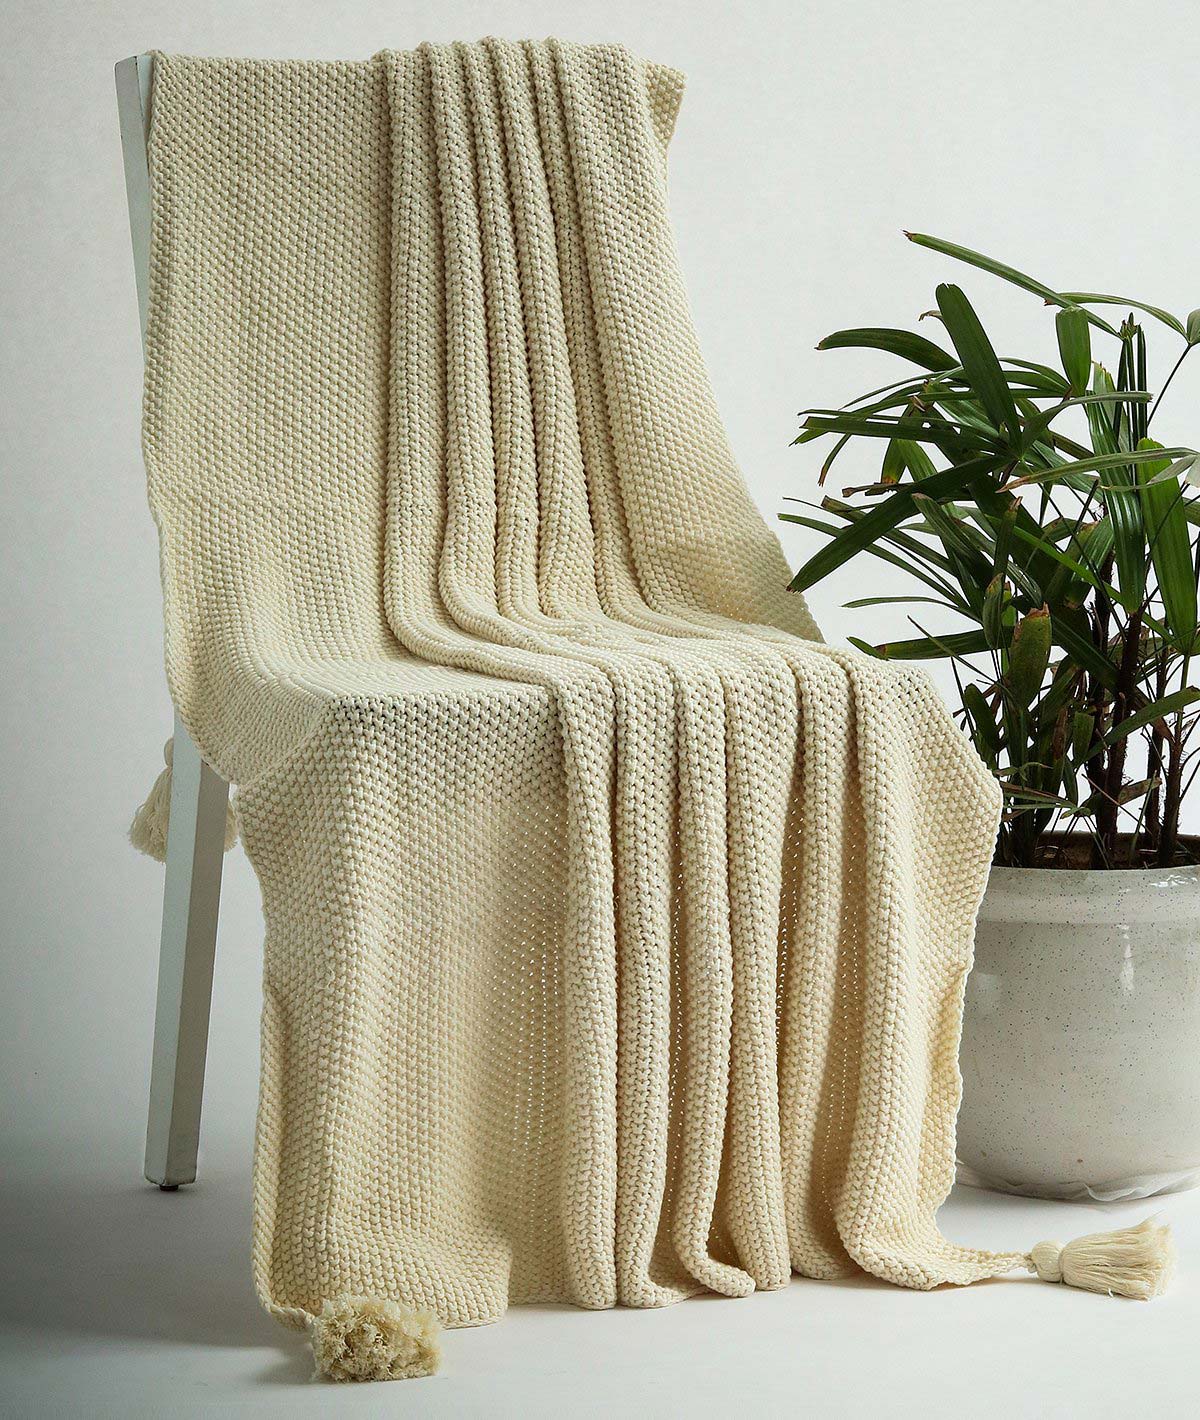 Chunky Seed Stitch - Natural Color 100% Cotton Knitted All Season AC Throw Blanket